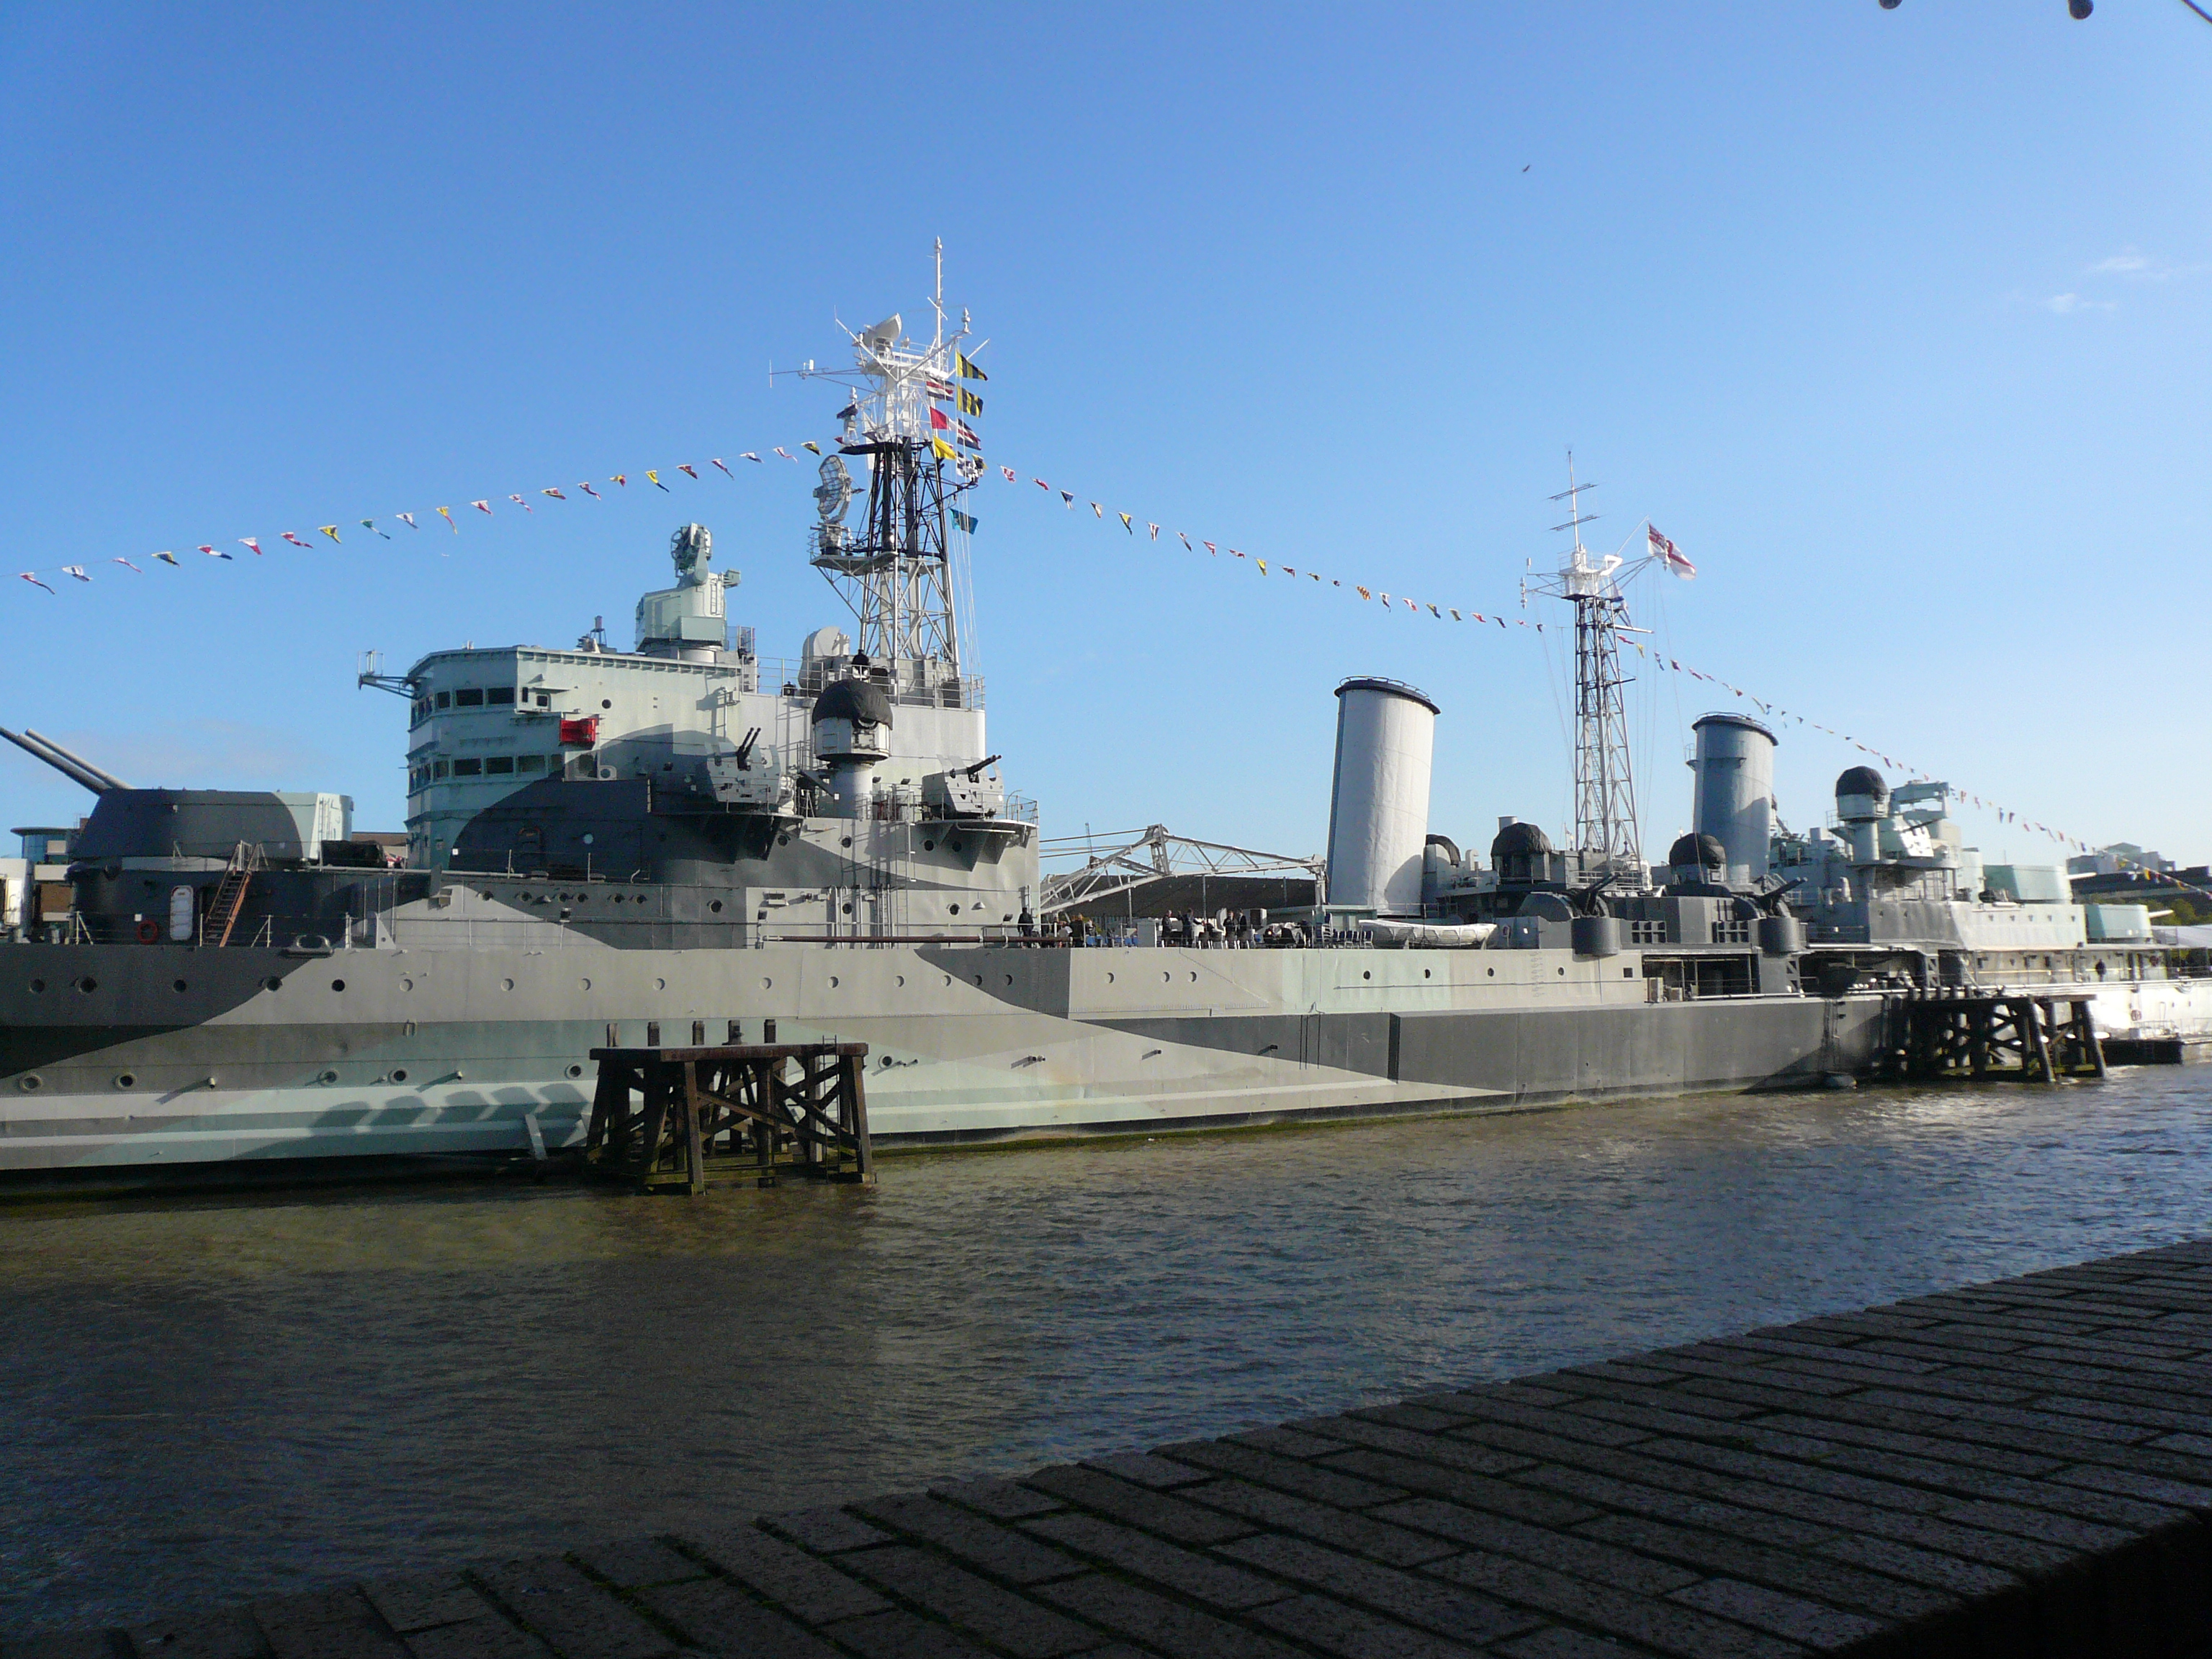 HMS Belfast on display as a museum ship, London, England, United Kingdom, Oct 2010, photo 2 of 2